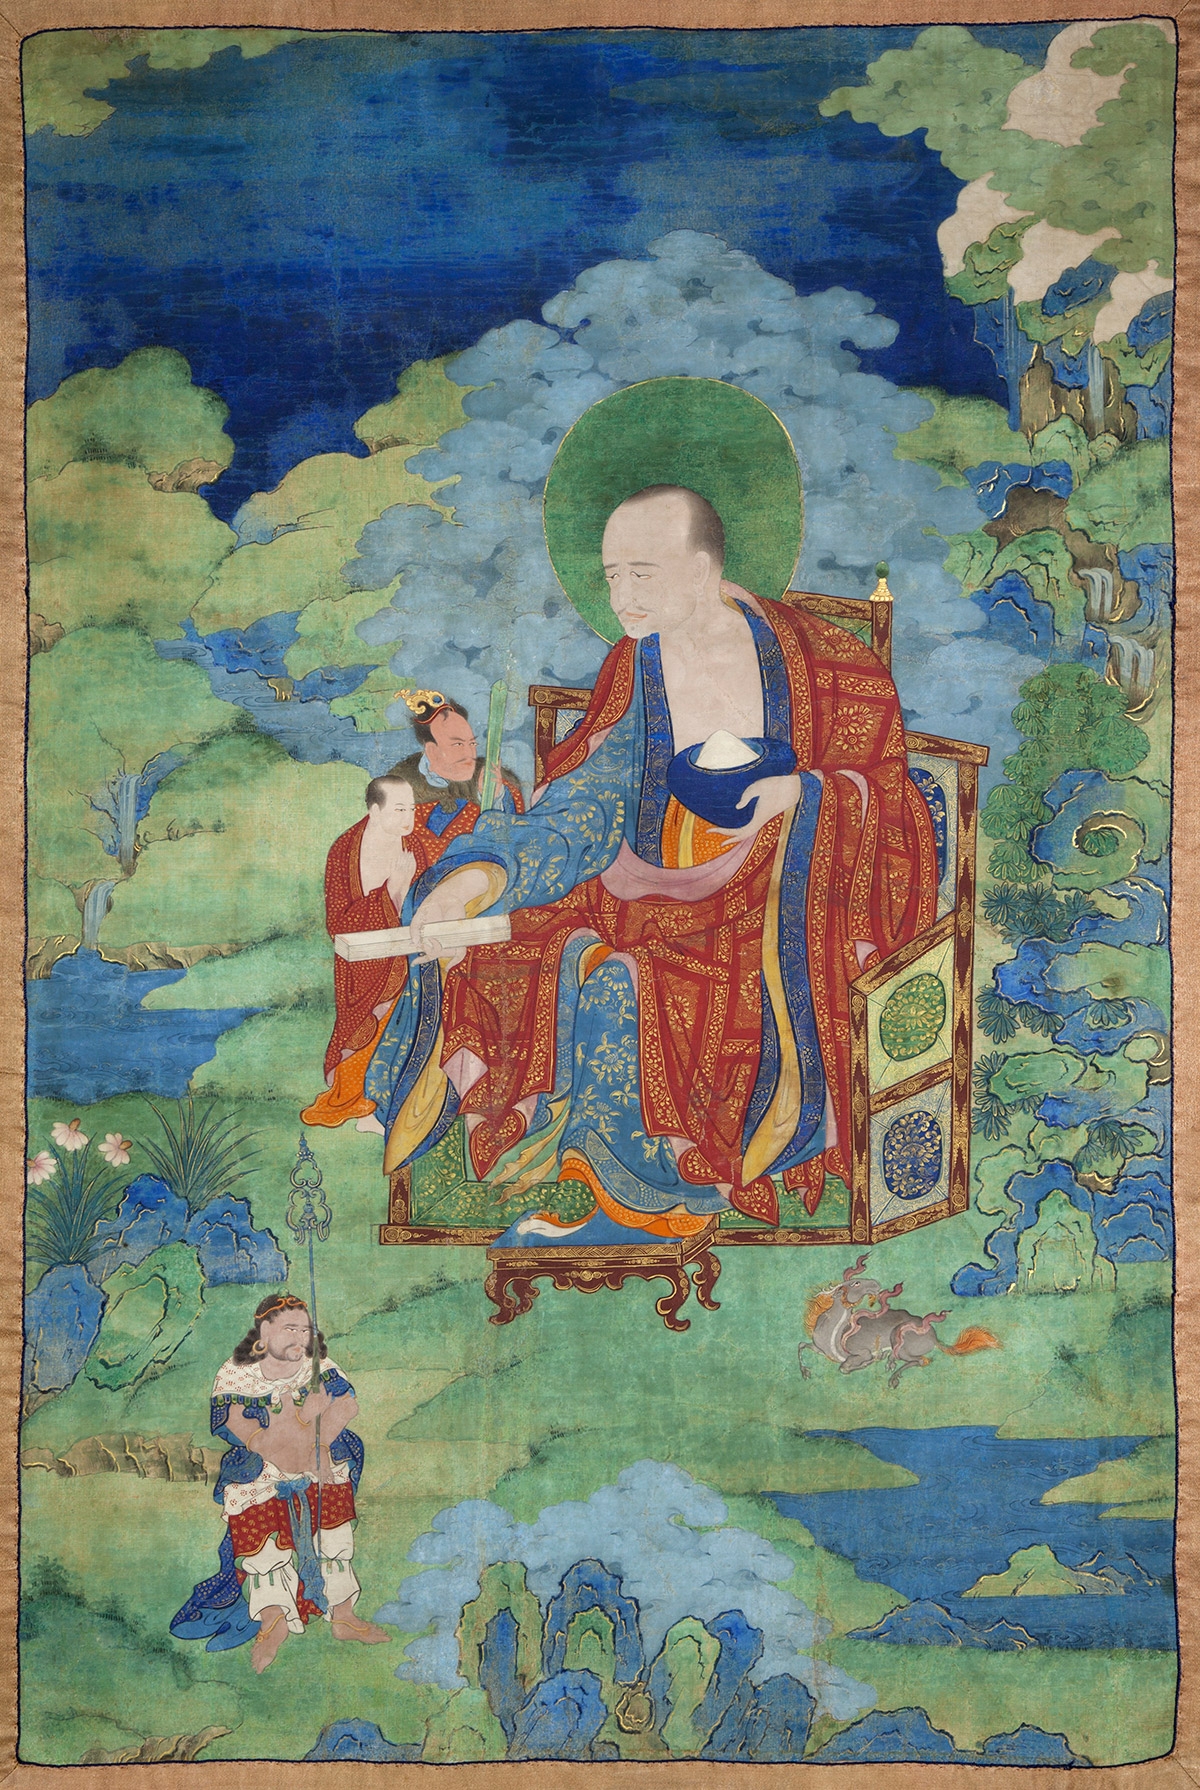 Pindola Bharadvaja Arhat. 17th century. Possibly Kham (East Tibet). Tradition: Gelug. Pigments on cloth. MU-CIV/MAO "Giuseppe Tucci," inv. 931/764. Placement as indicated on verso: 4th from left. Image courtesy of the Museum of Civilisation/Museum of Oriental Art "Giuseppe Tucci," Rome.